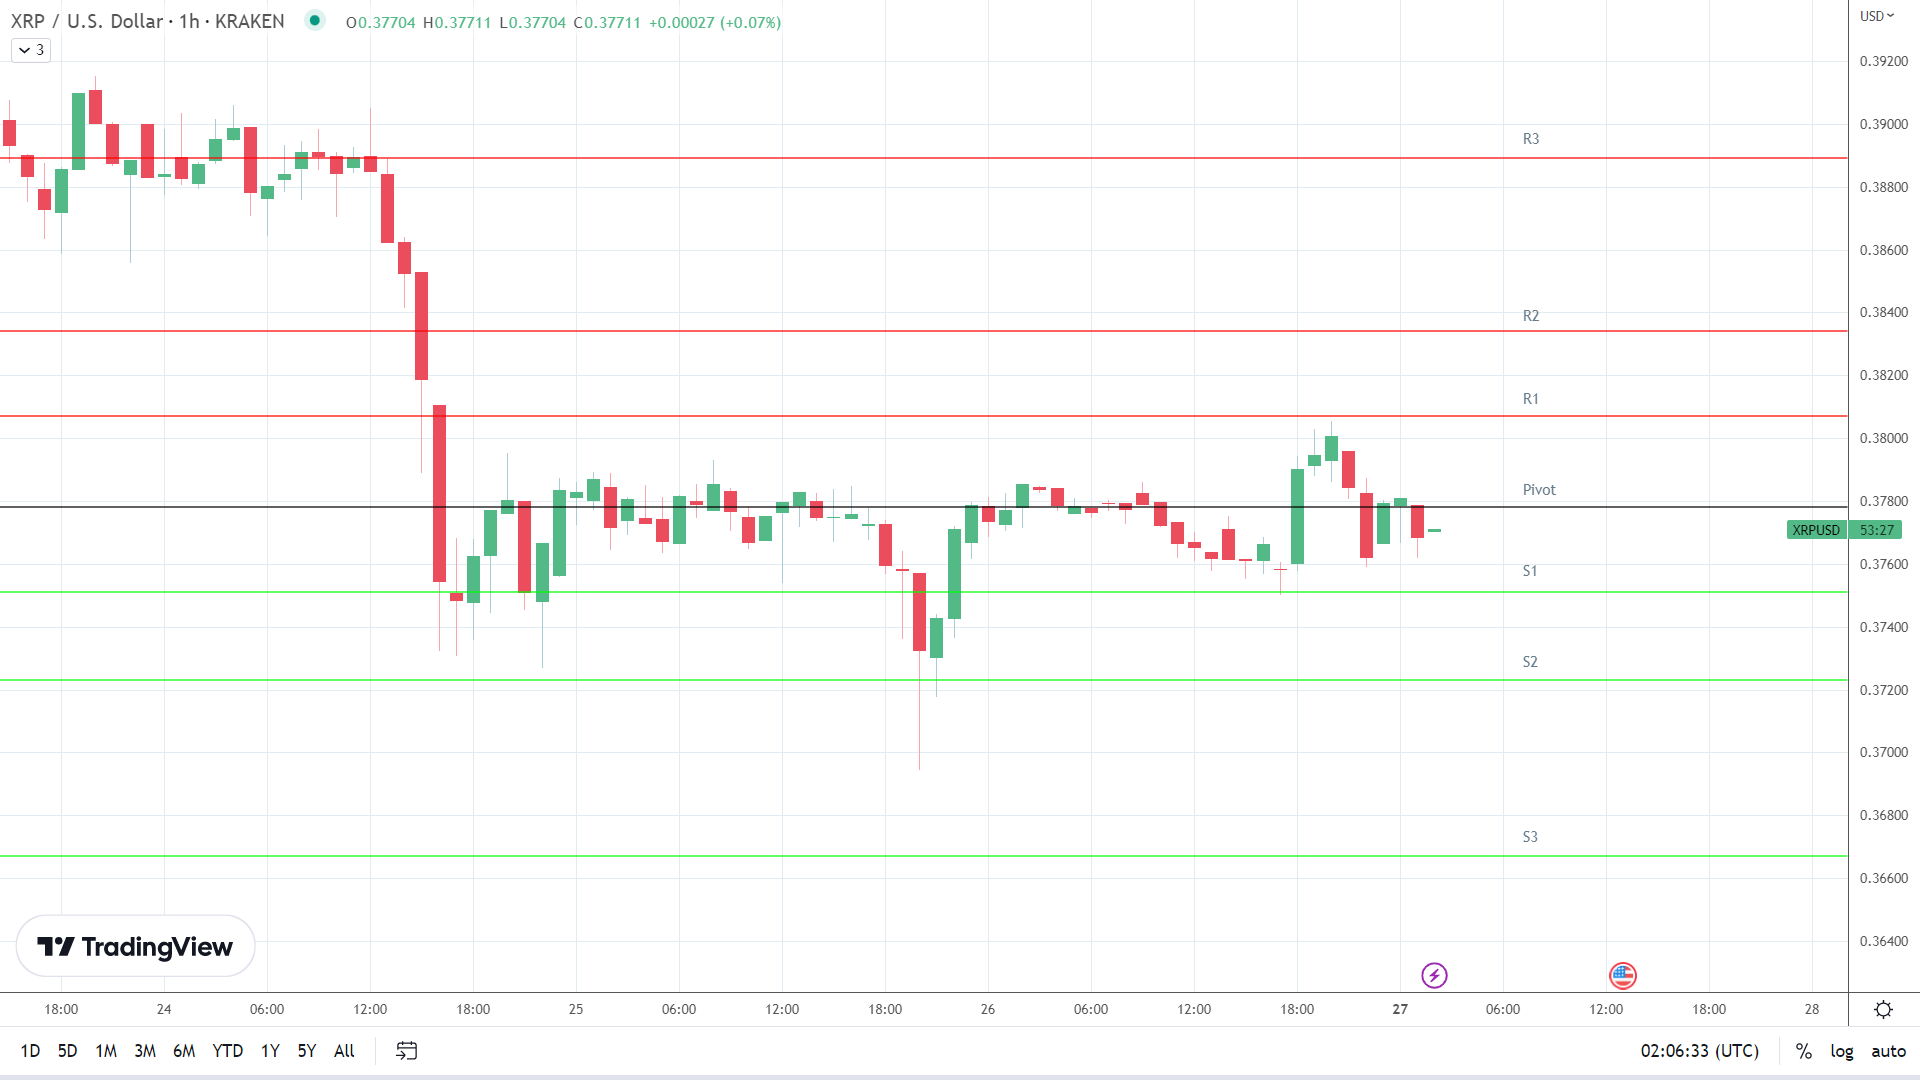 XRP resistance levels are in play above the pivot.